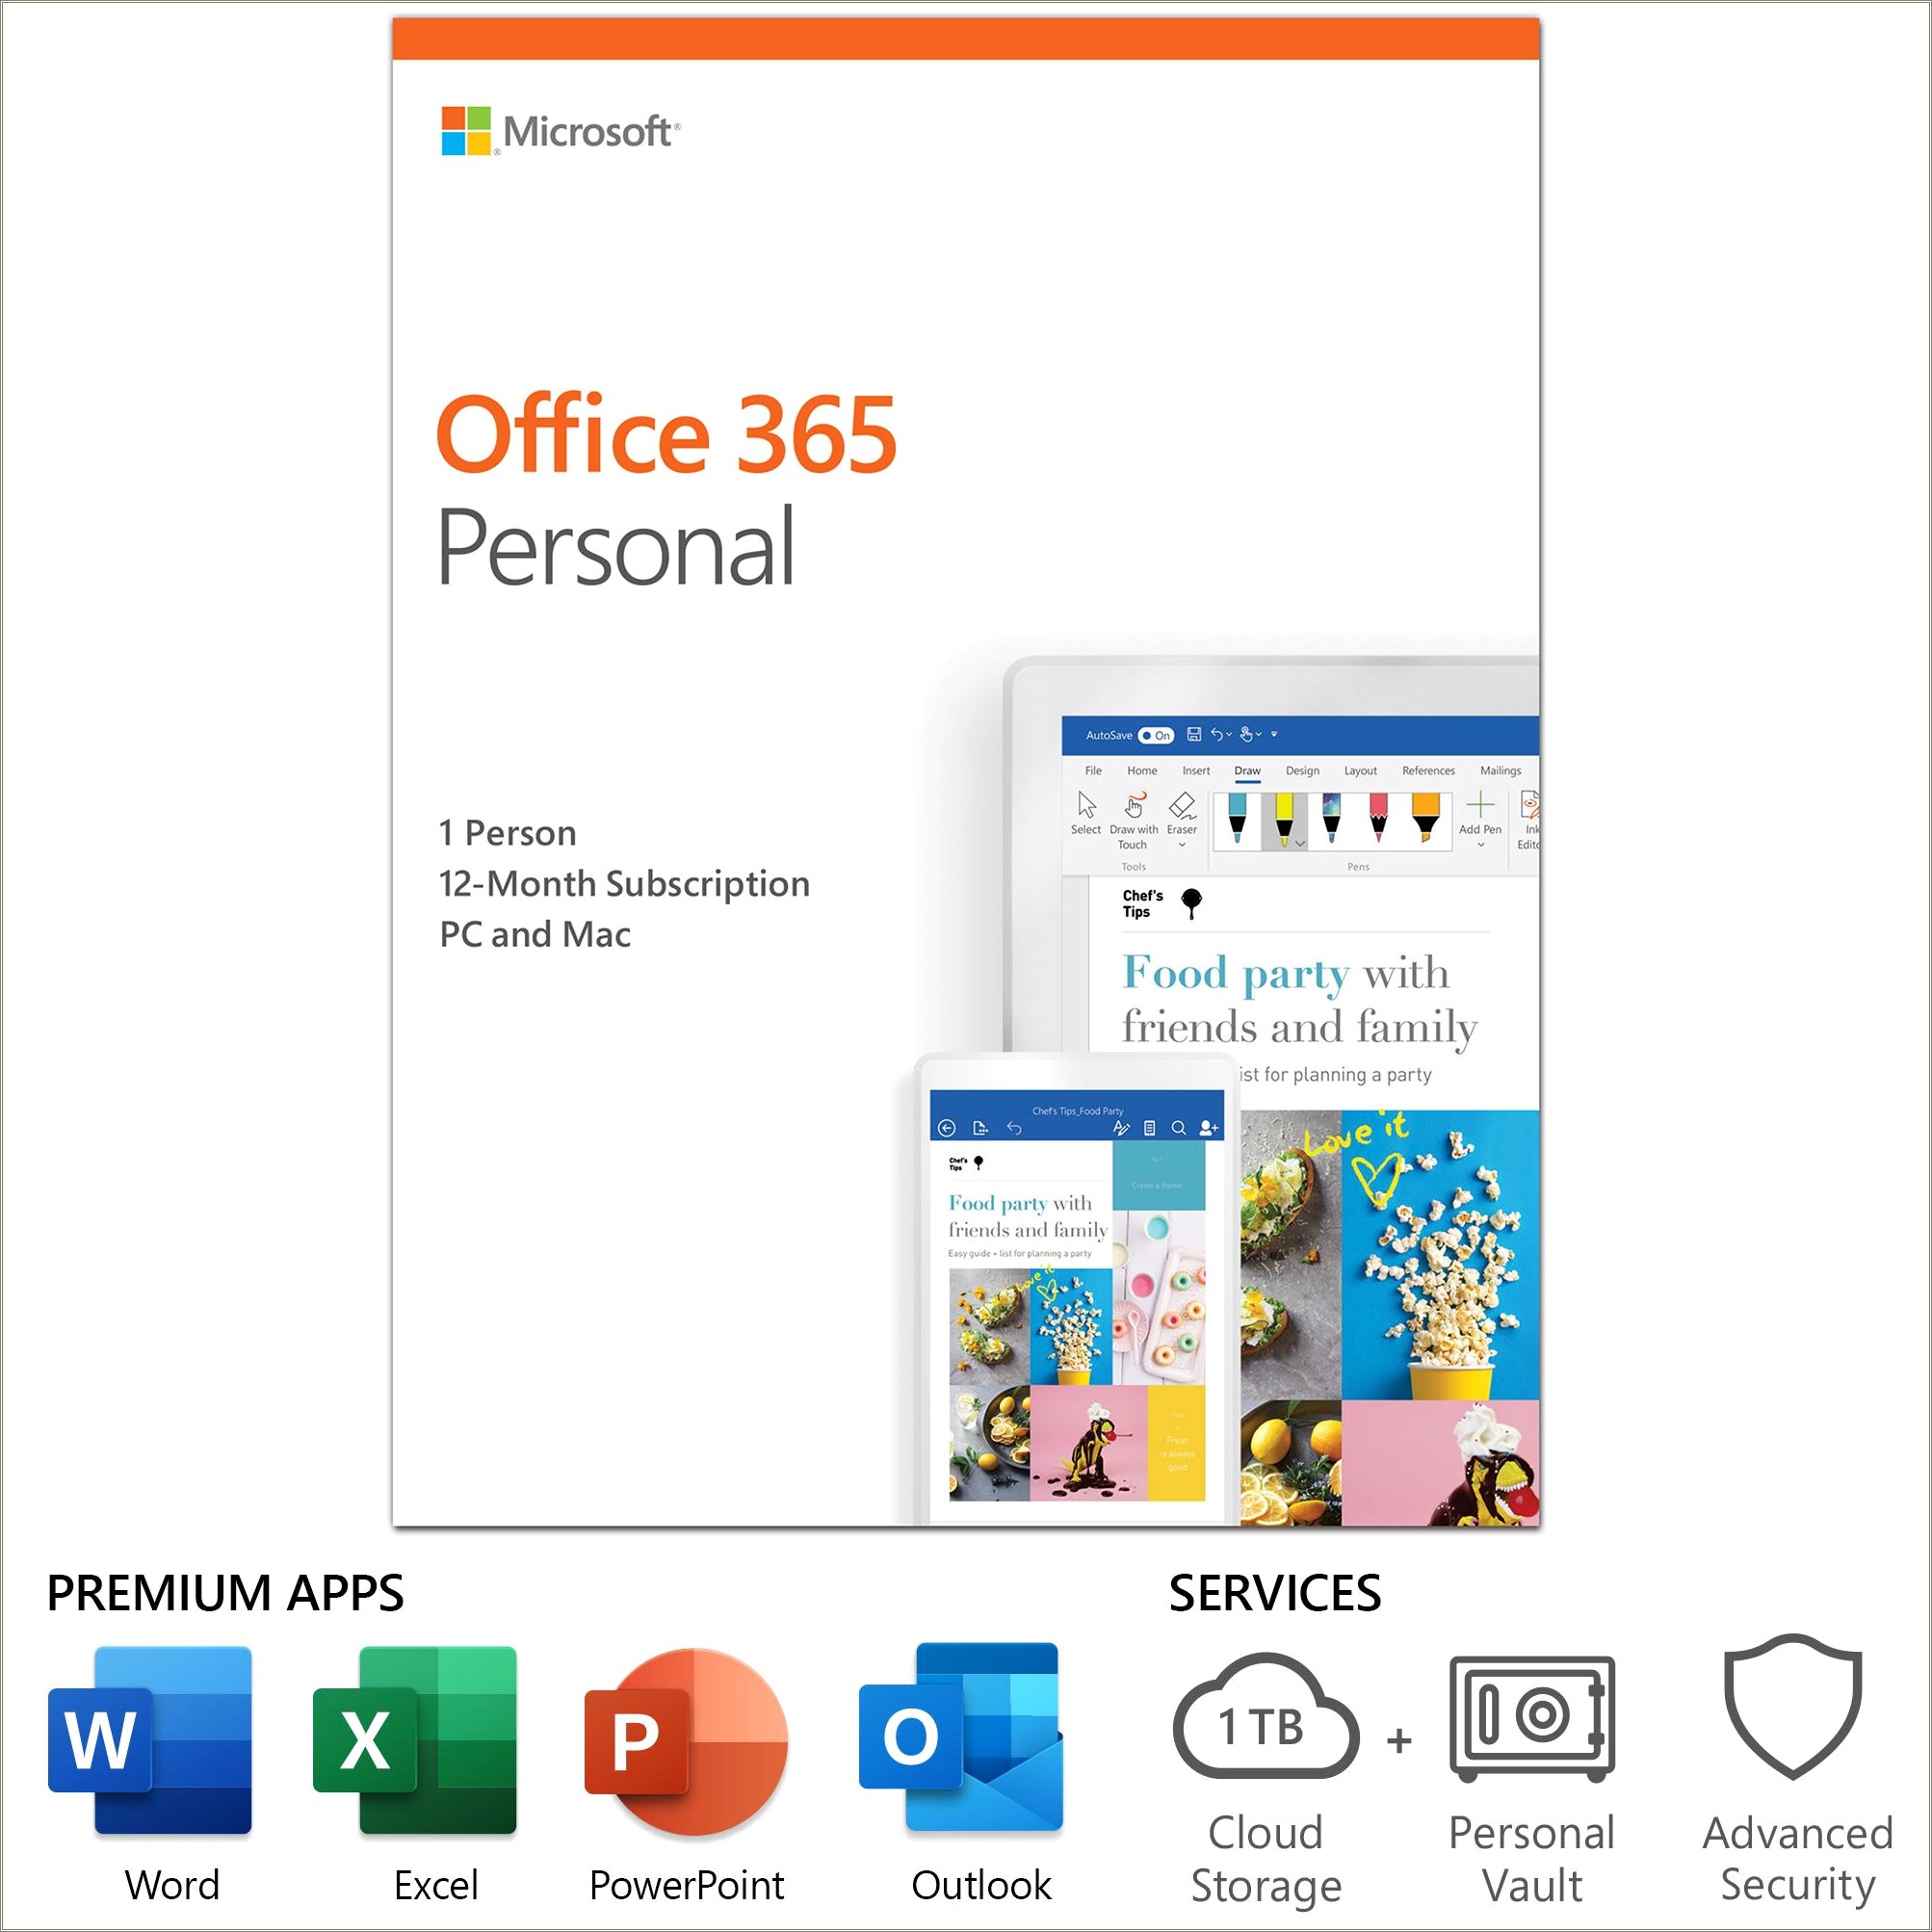 Does Microsoft Office 365 Personal Include Resume Templates